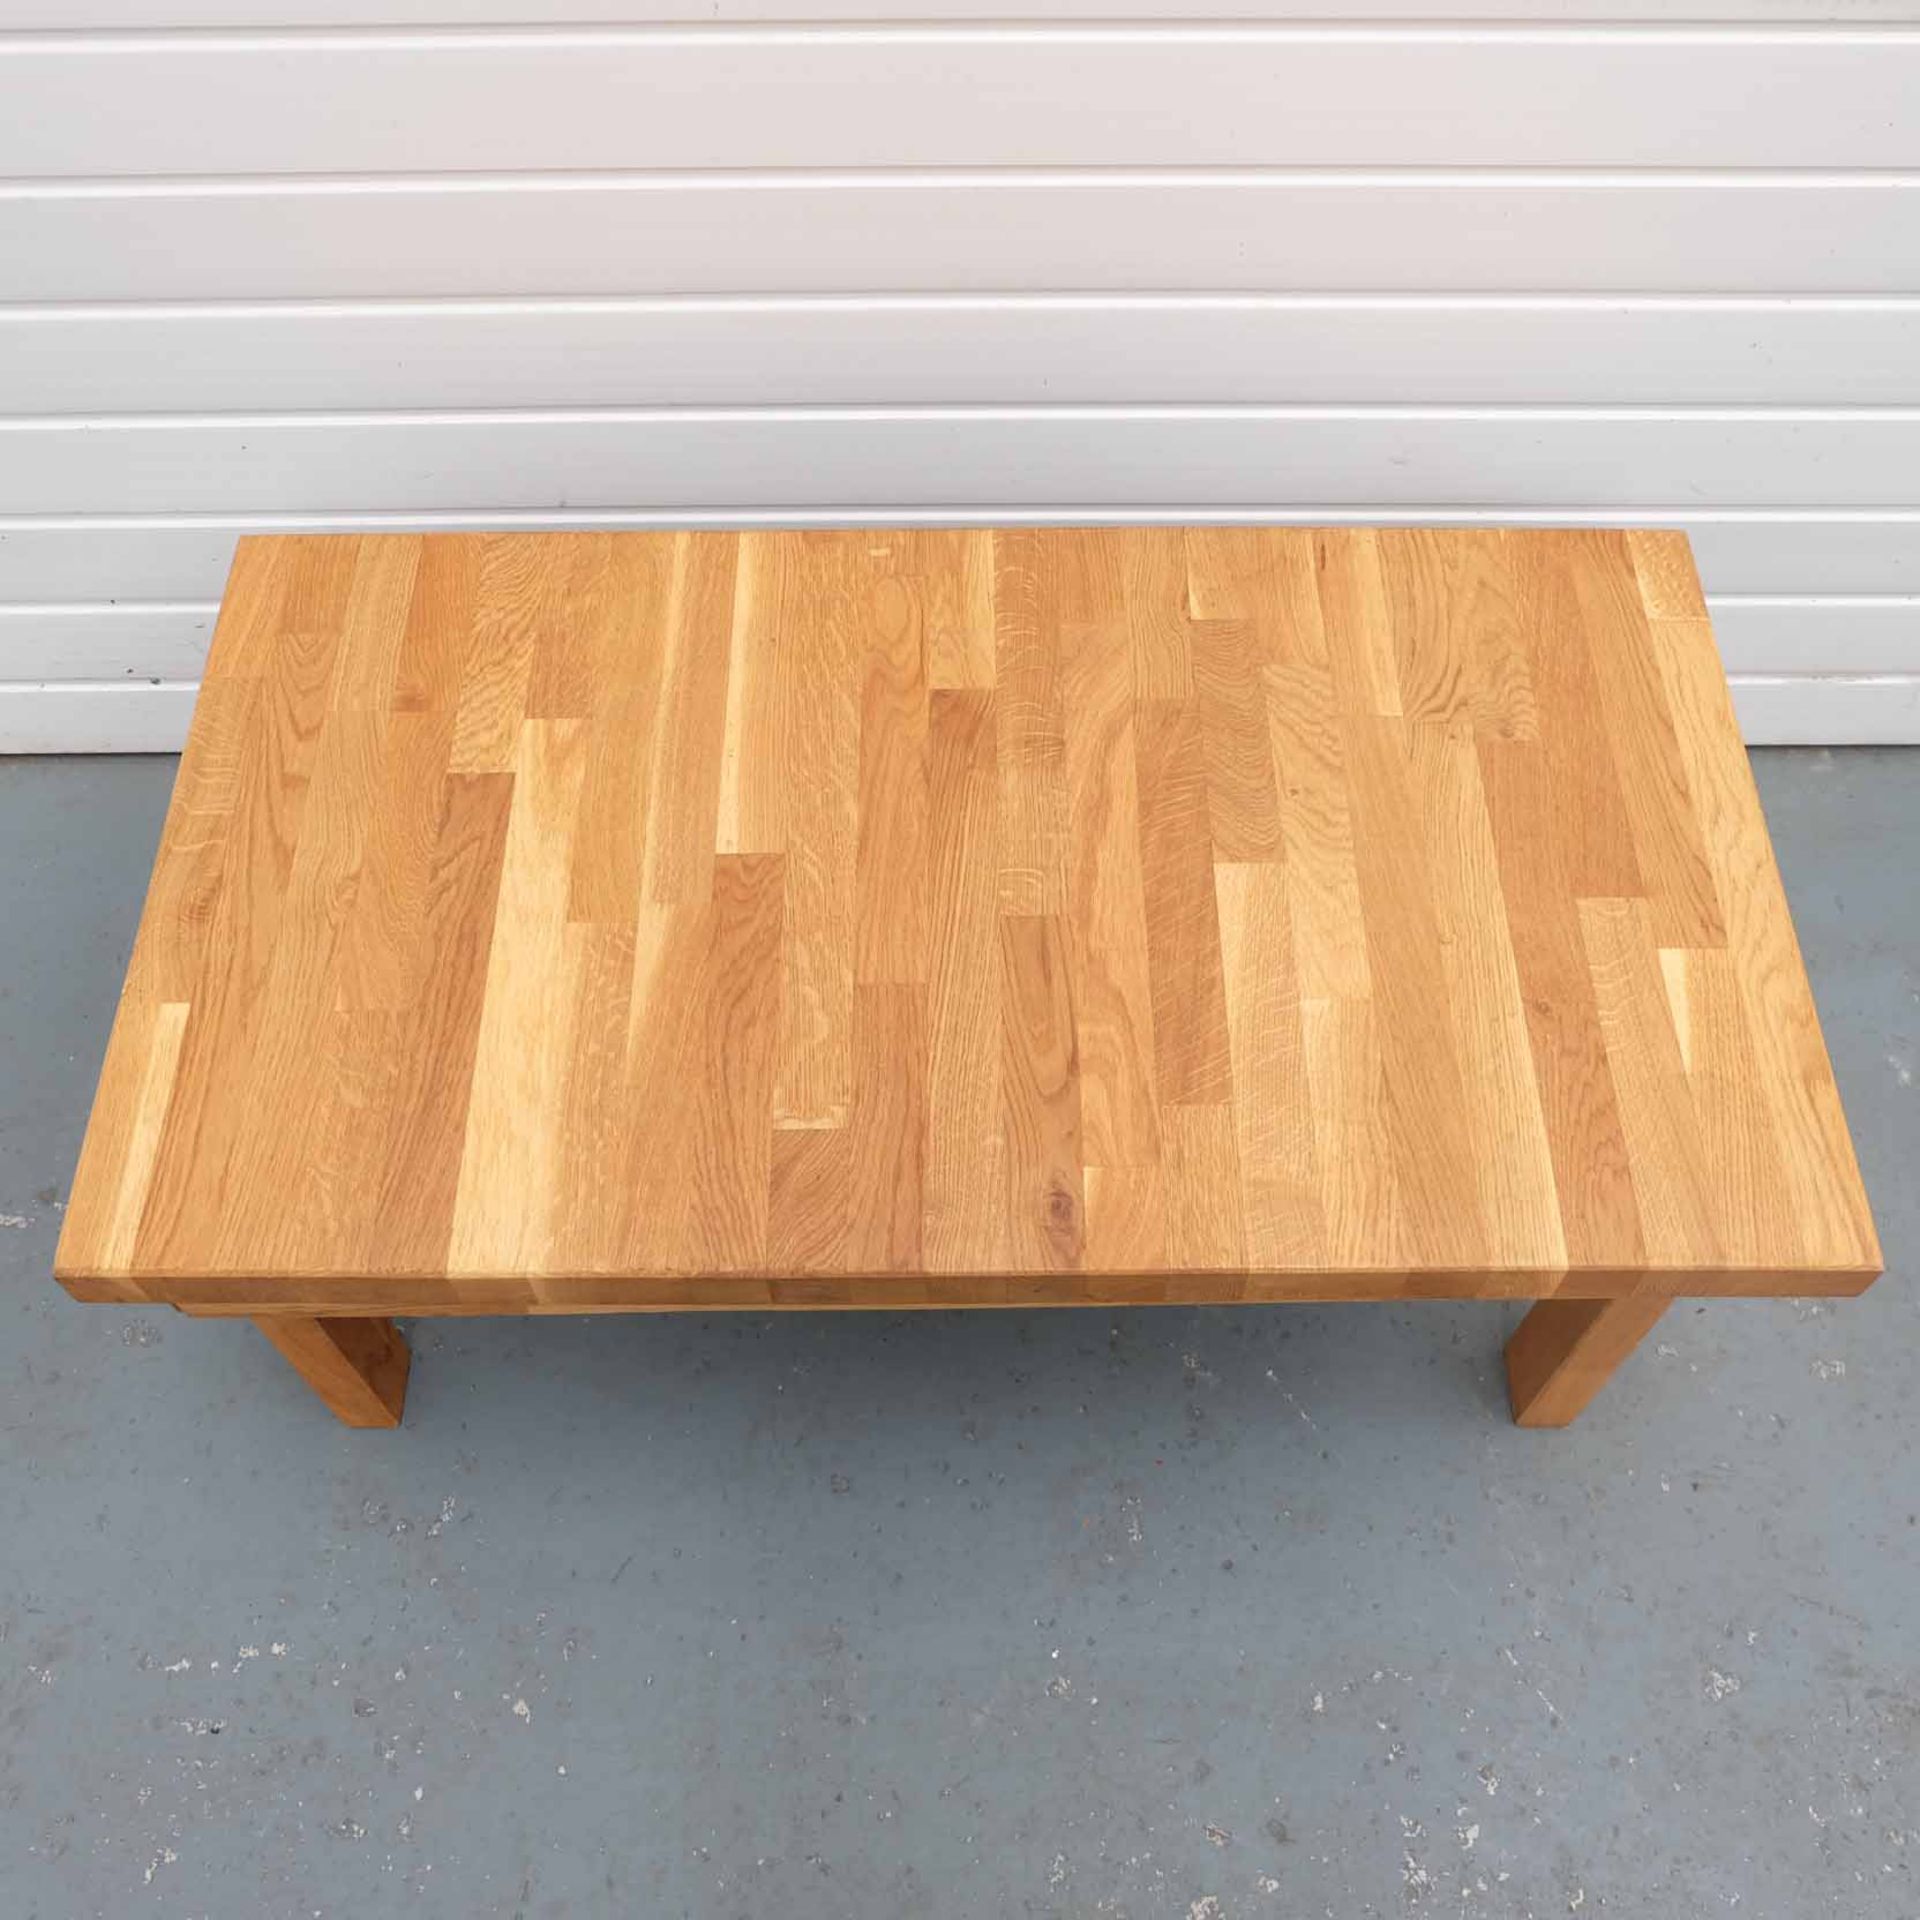 Solid Oak Coffee Table. - Image 3 of 3